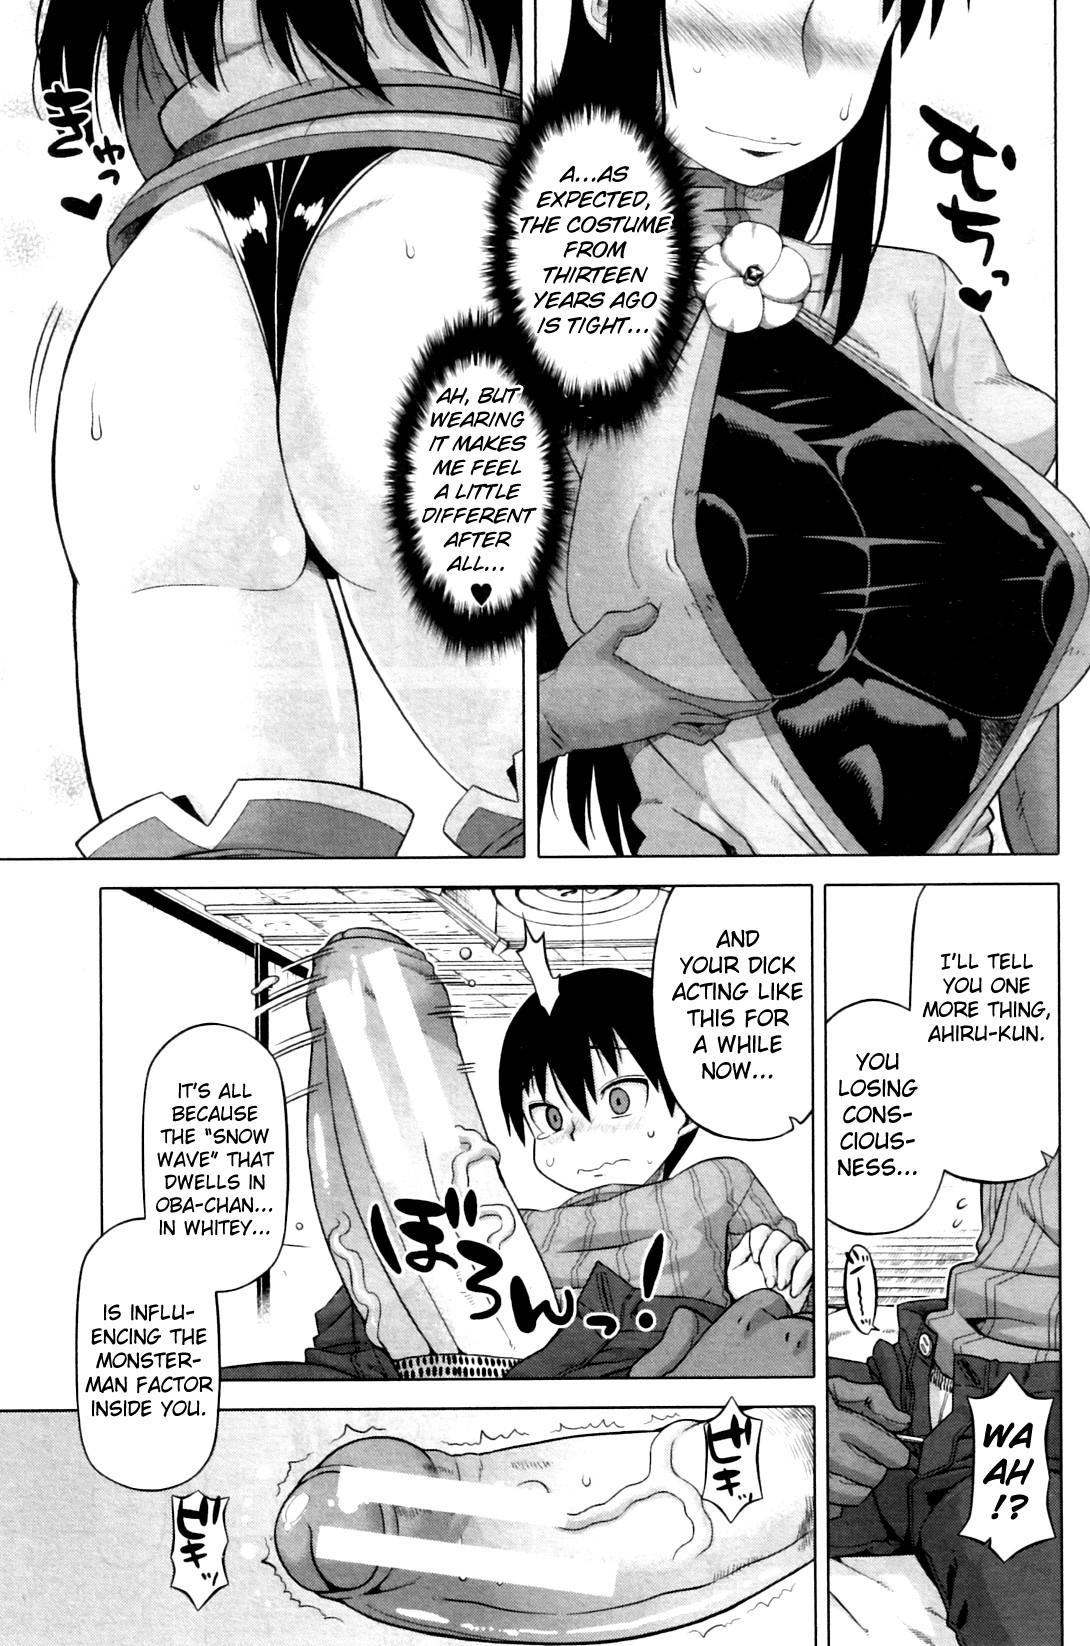 Barely 18 Porn [Takatu] Snow Knight Whitey (30) Ch. 1-5 [Eng] {doujin-moe.us} Cfnm - Page 9